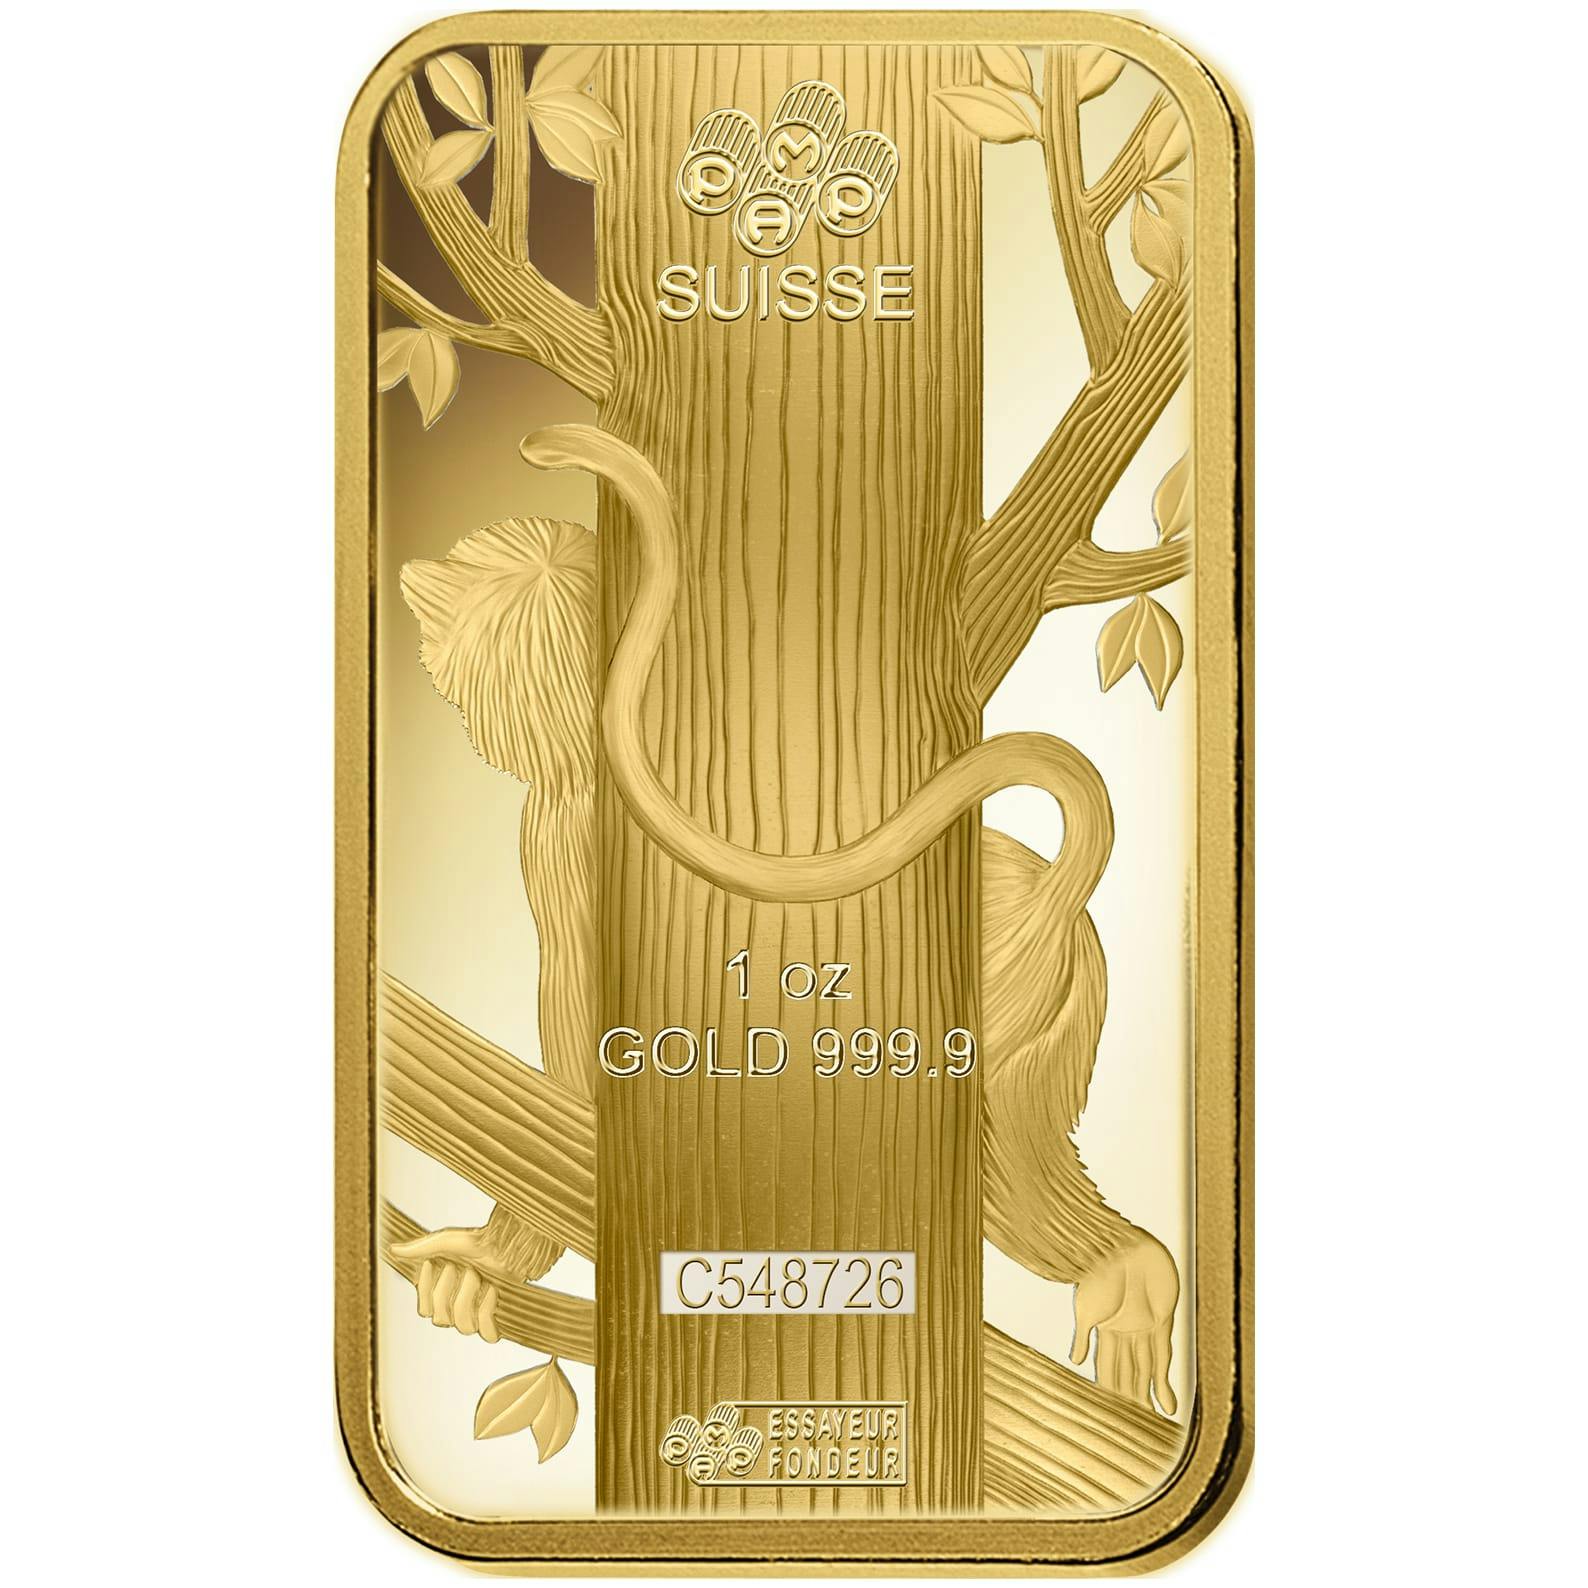 The obverse side of the PAMP Suisse Lunar Monkey gold bar